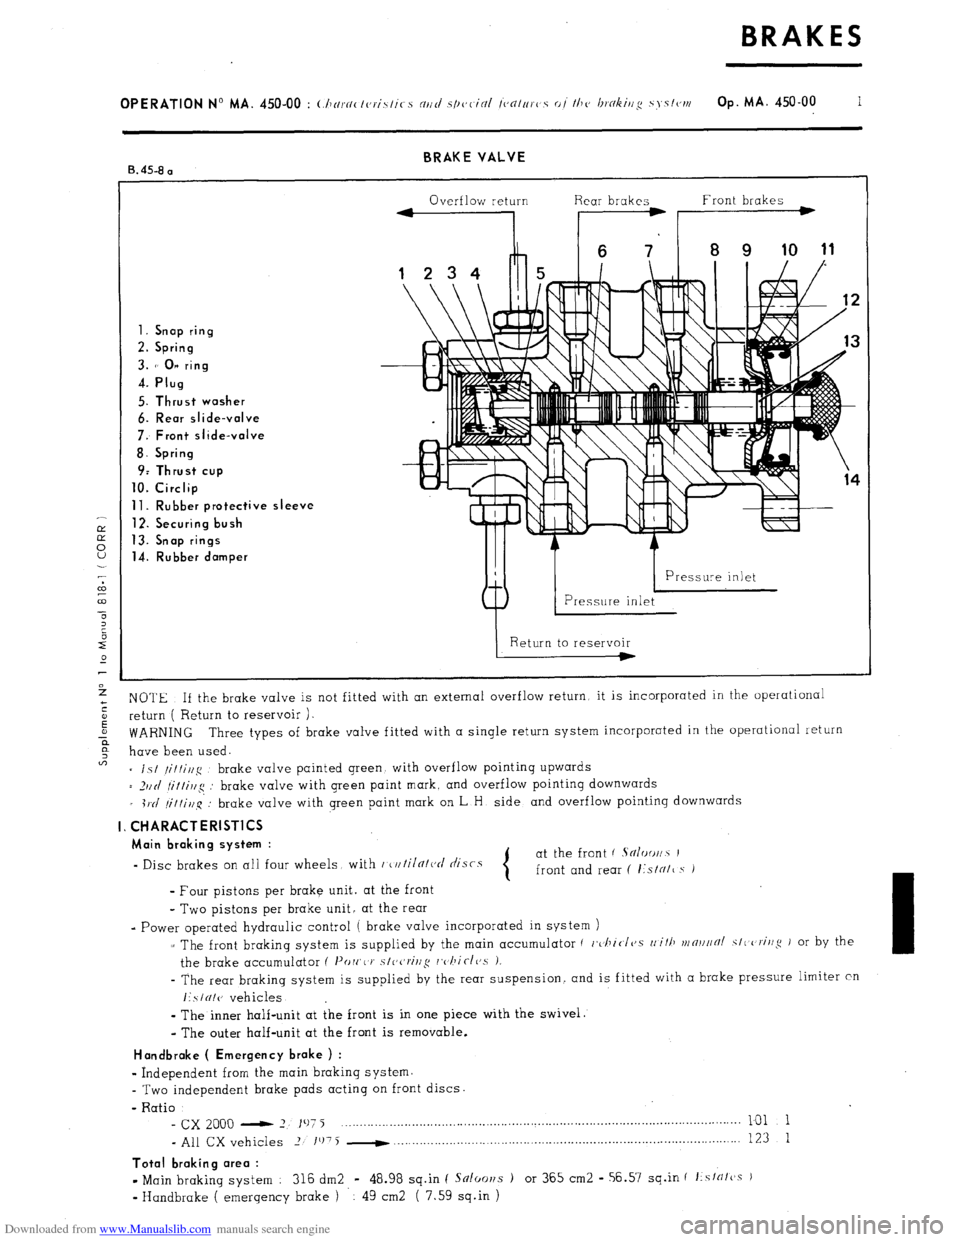 Citroen CX 1985 1.G Workshop Manual Downloaded from www.Manualslib.com manuals search engine BRAKE VALVE 
B. 45-8 a 
Overflow return Rear brakes Front brakes 
1. Snap ring 
2. Spring 
3. 1’ 0” ring 
4. Plug 
5. Thrust washer 
6. Rea